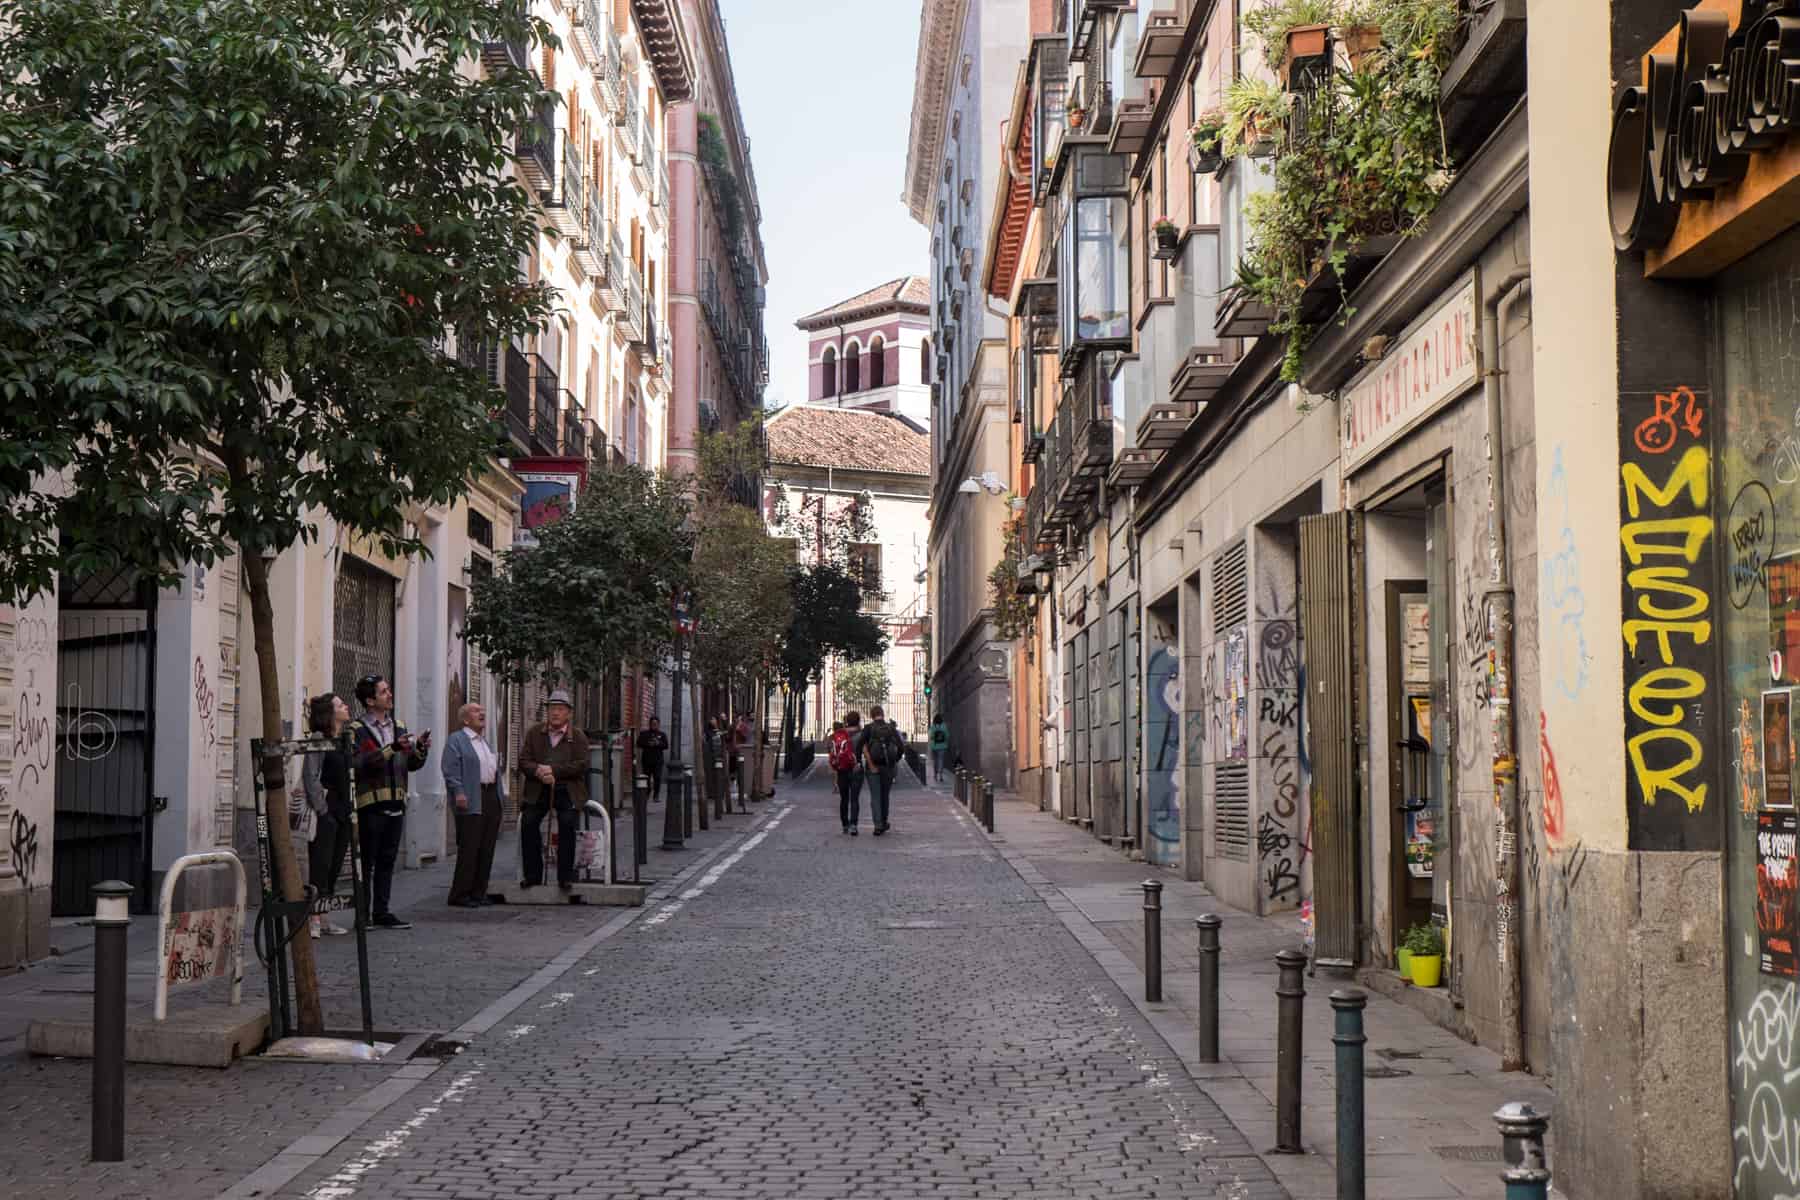 A street in Madrid whose mostly beige stone walls are covered in graffiti. Two people are walking down the street, while four people stand to one side talking. 